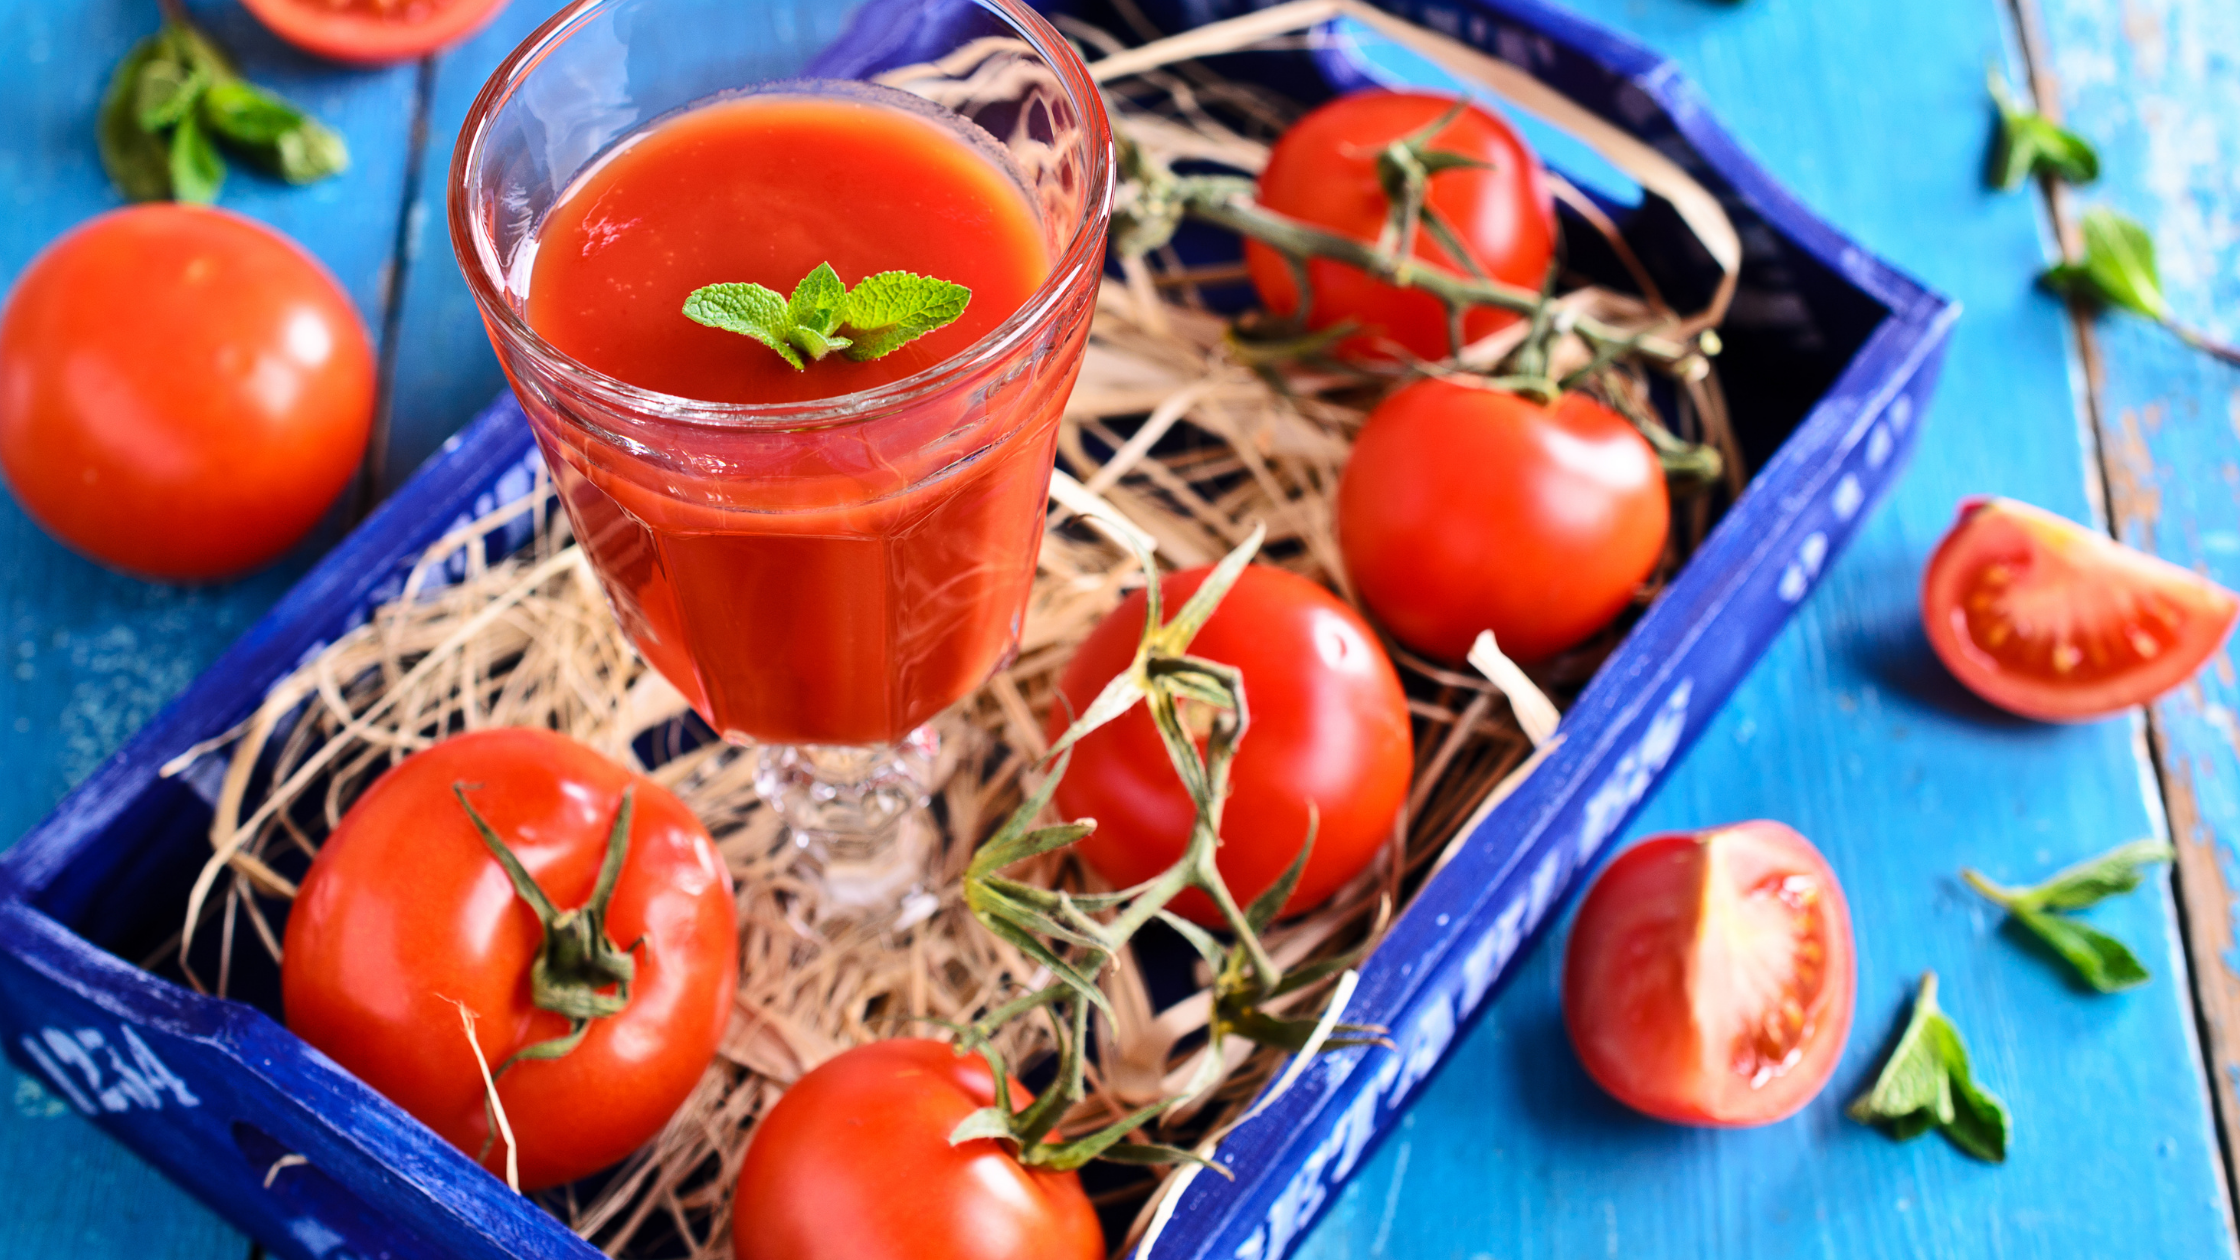 12 Powerful Health Benefits Of Tomatoes And Its Juice.